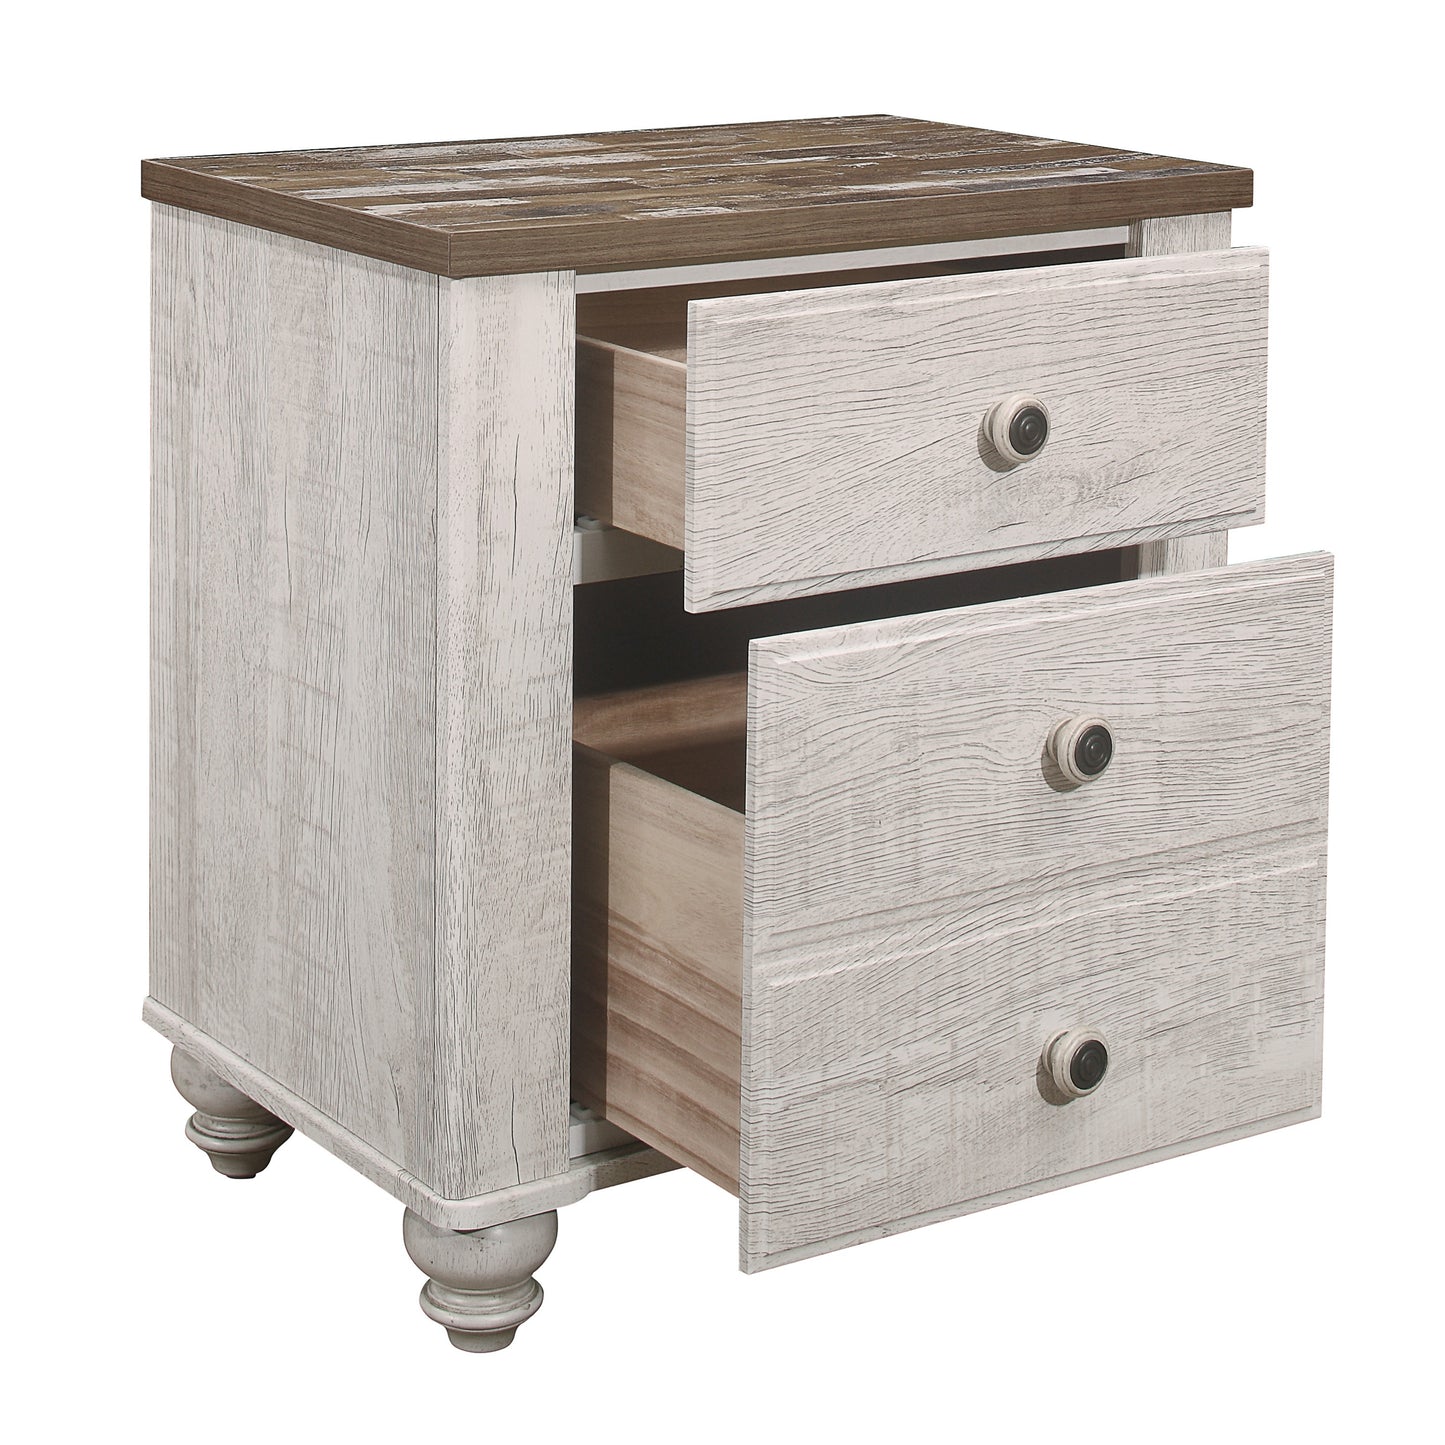 Transitional-Rustic Style Nightstand with Two Drawers